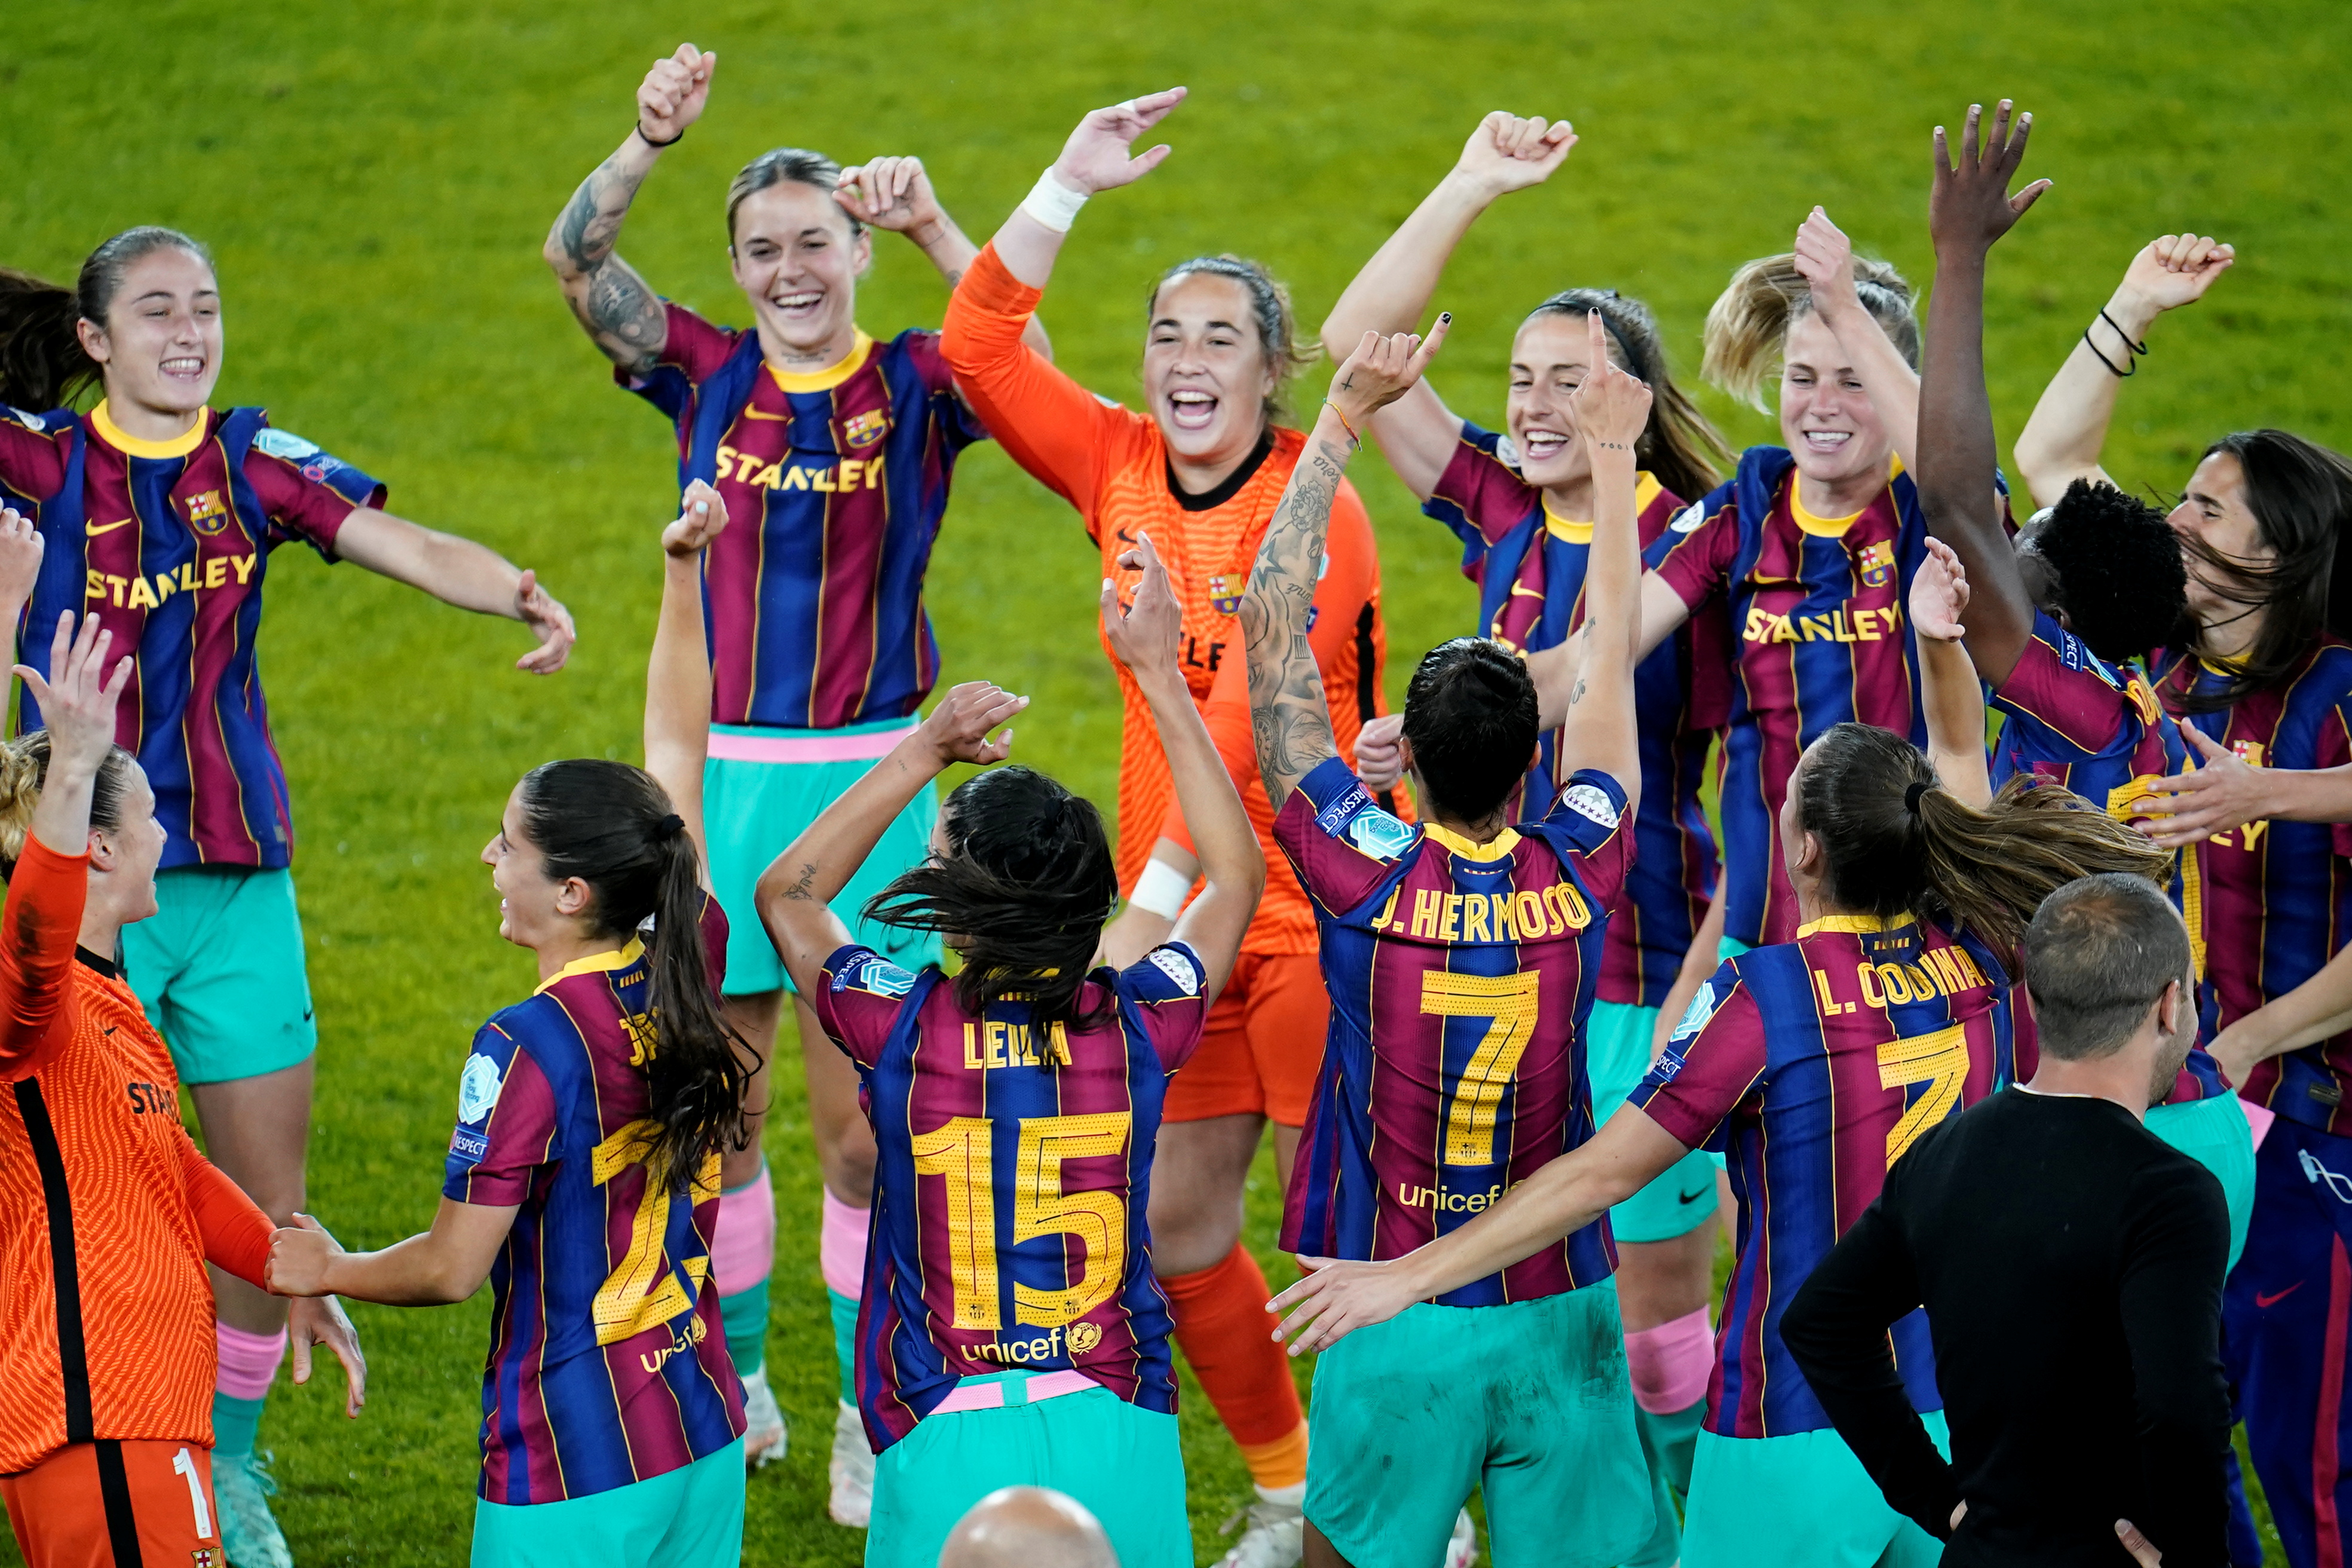 Barça Femení players celebrate on the pitch in Gothenburg after their 4-0 Champions League final victory over Chelsea in May 2021 (by Bjorn Larsson Rosvall/TT News Agency via REUTERS)